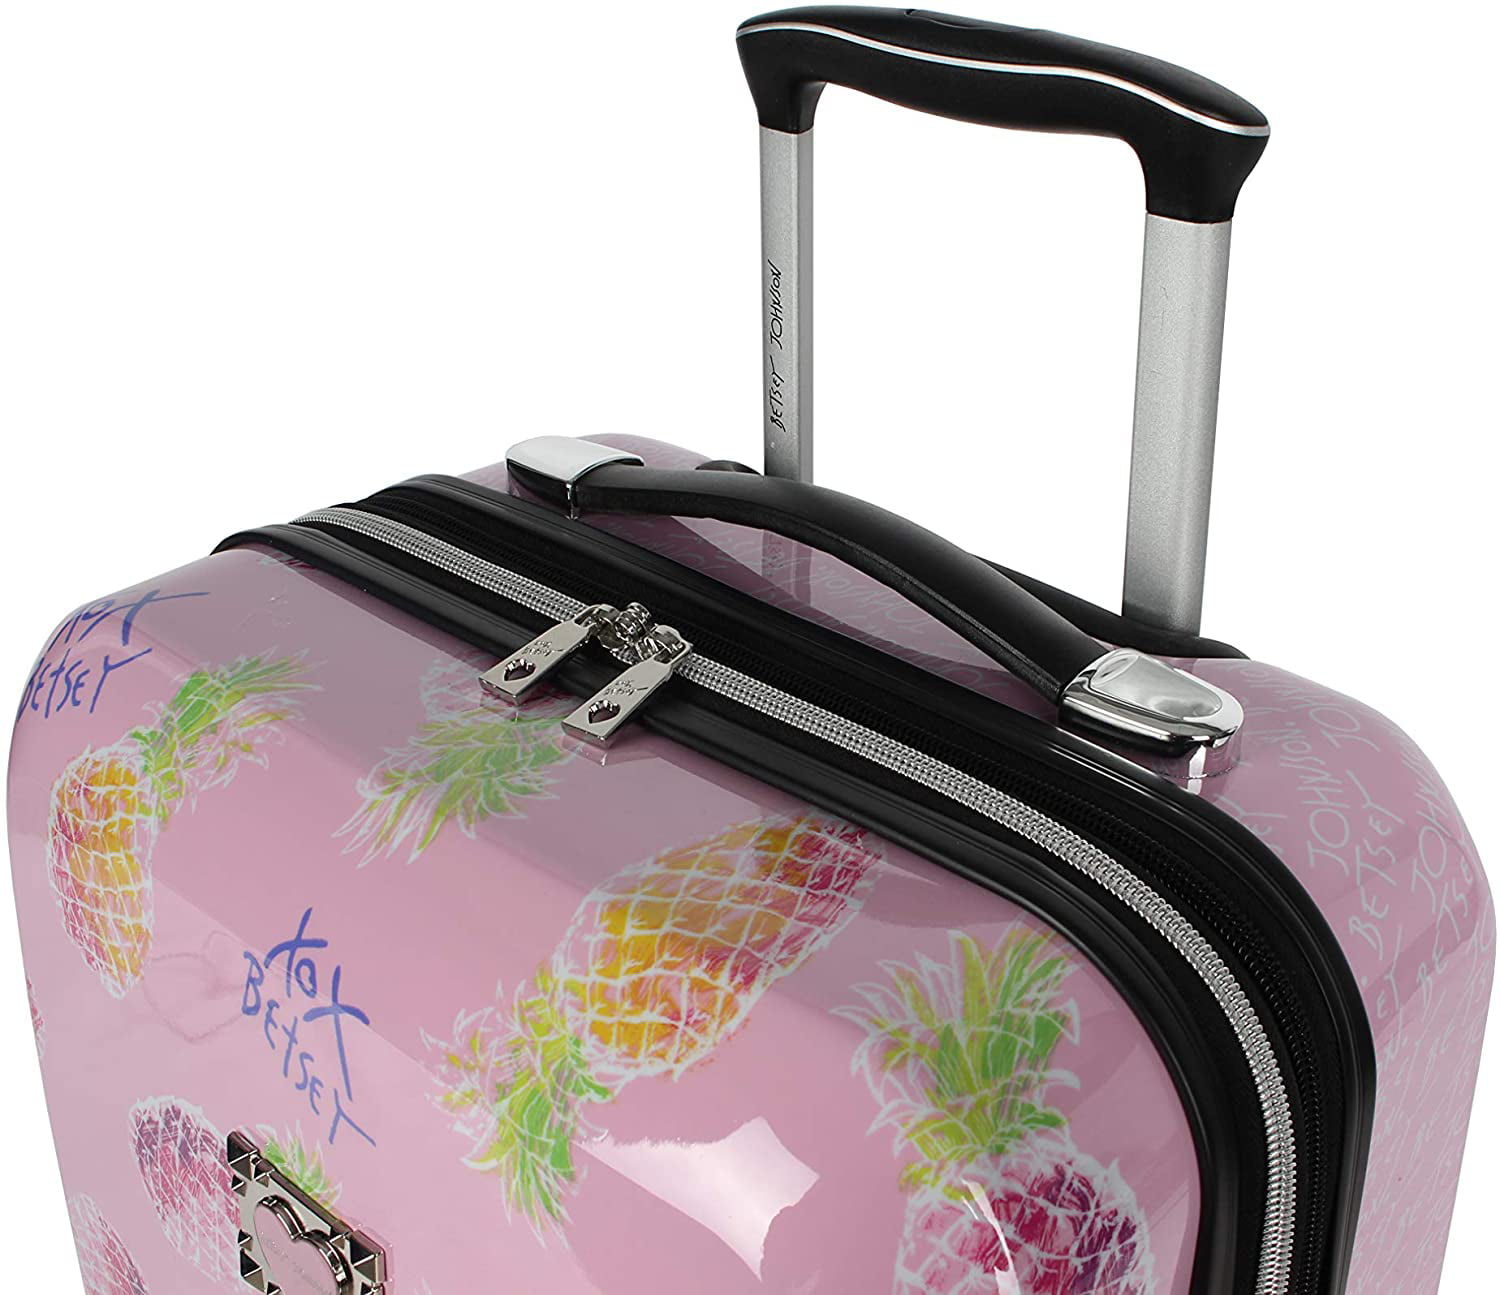 Expandable Scratch Resistant Betsey Johnson 26 Inch Checked Luggage Collection 26IN, Colada Hardside Suitcase ABS + PC Designer Lightweight Bag with 8-Rolling Spinner Wheels 